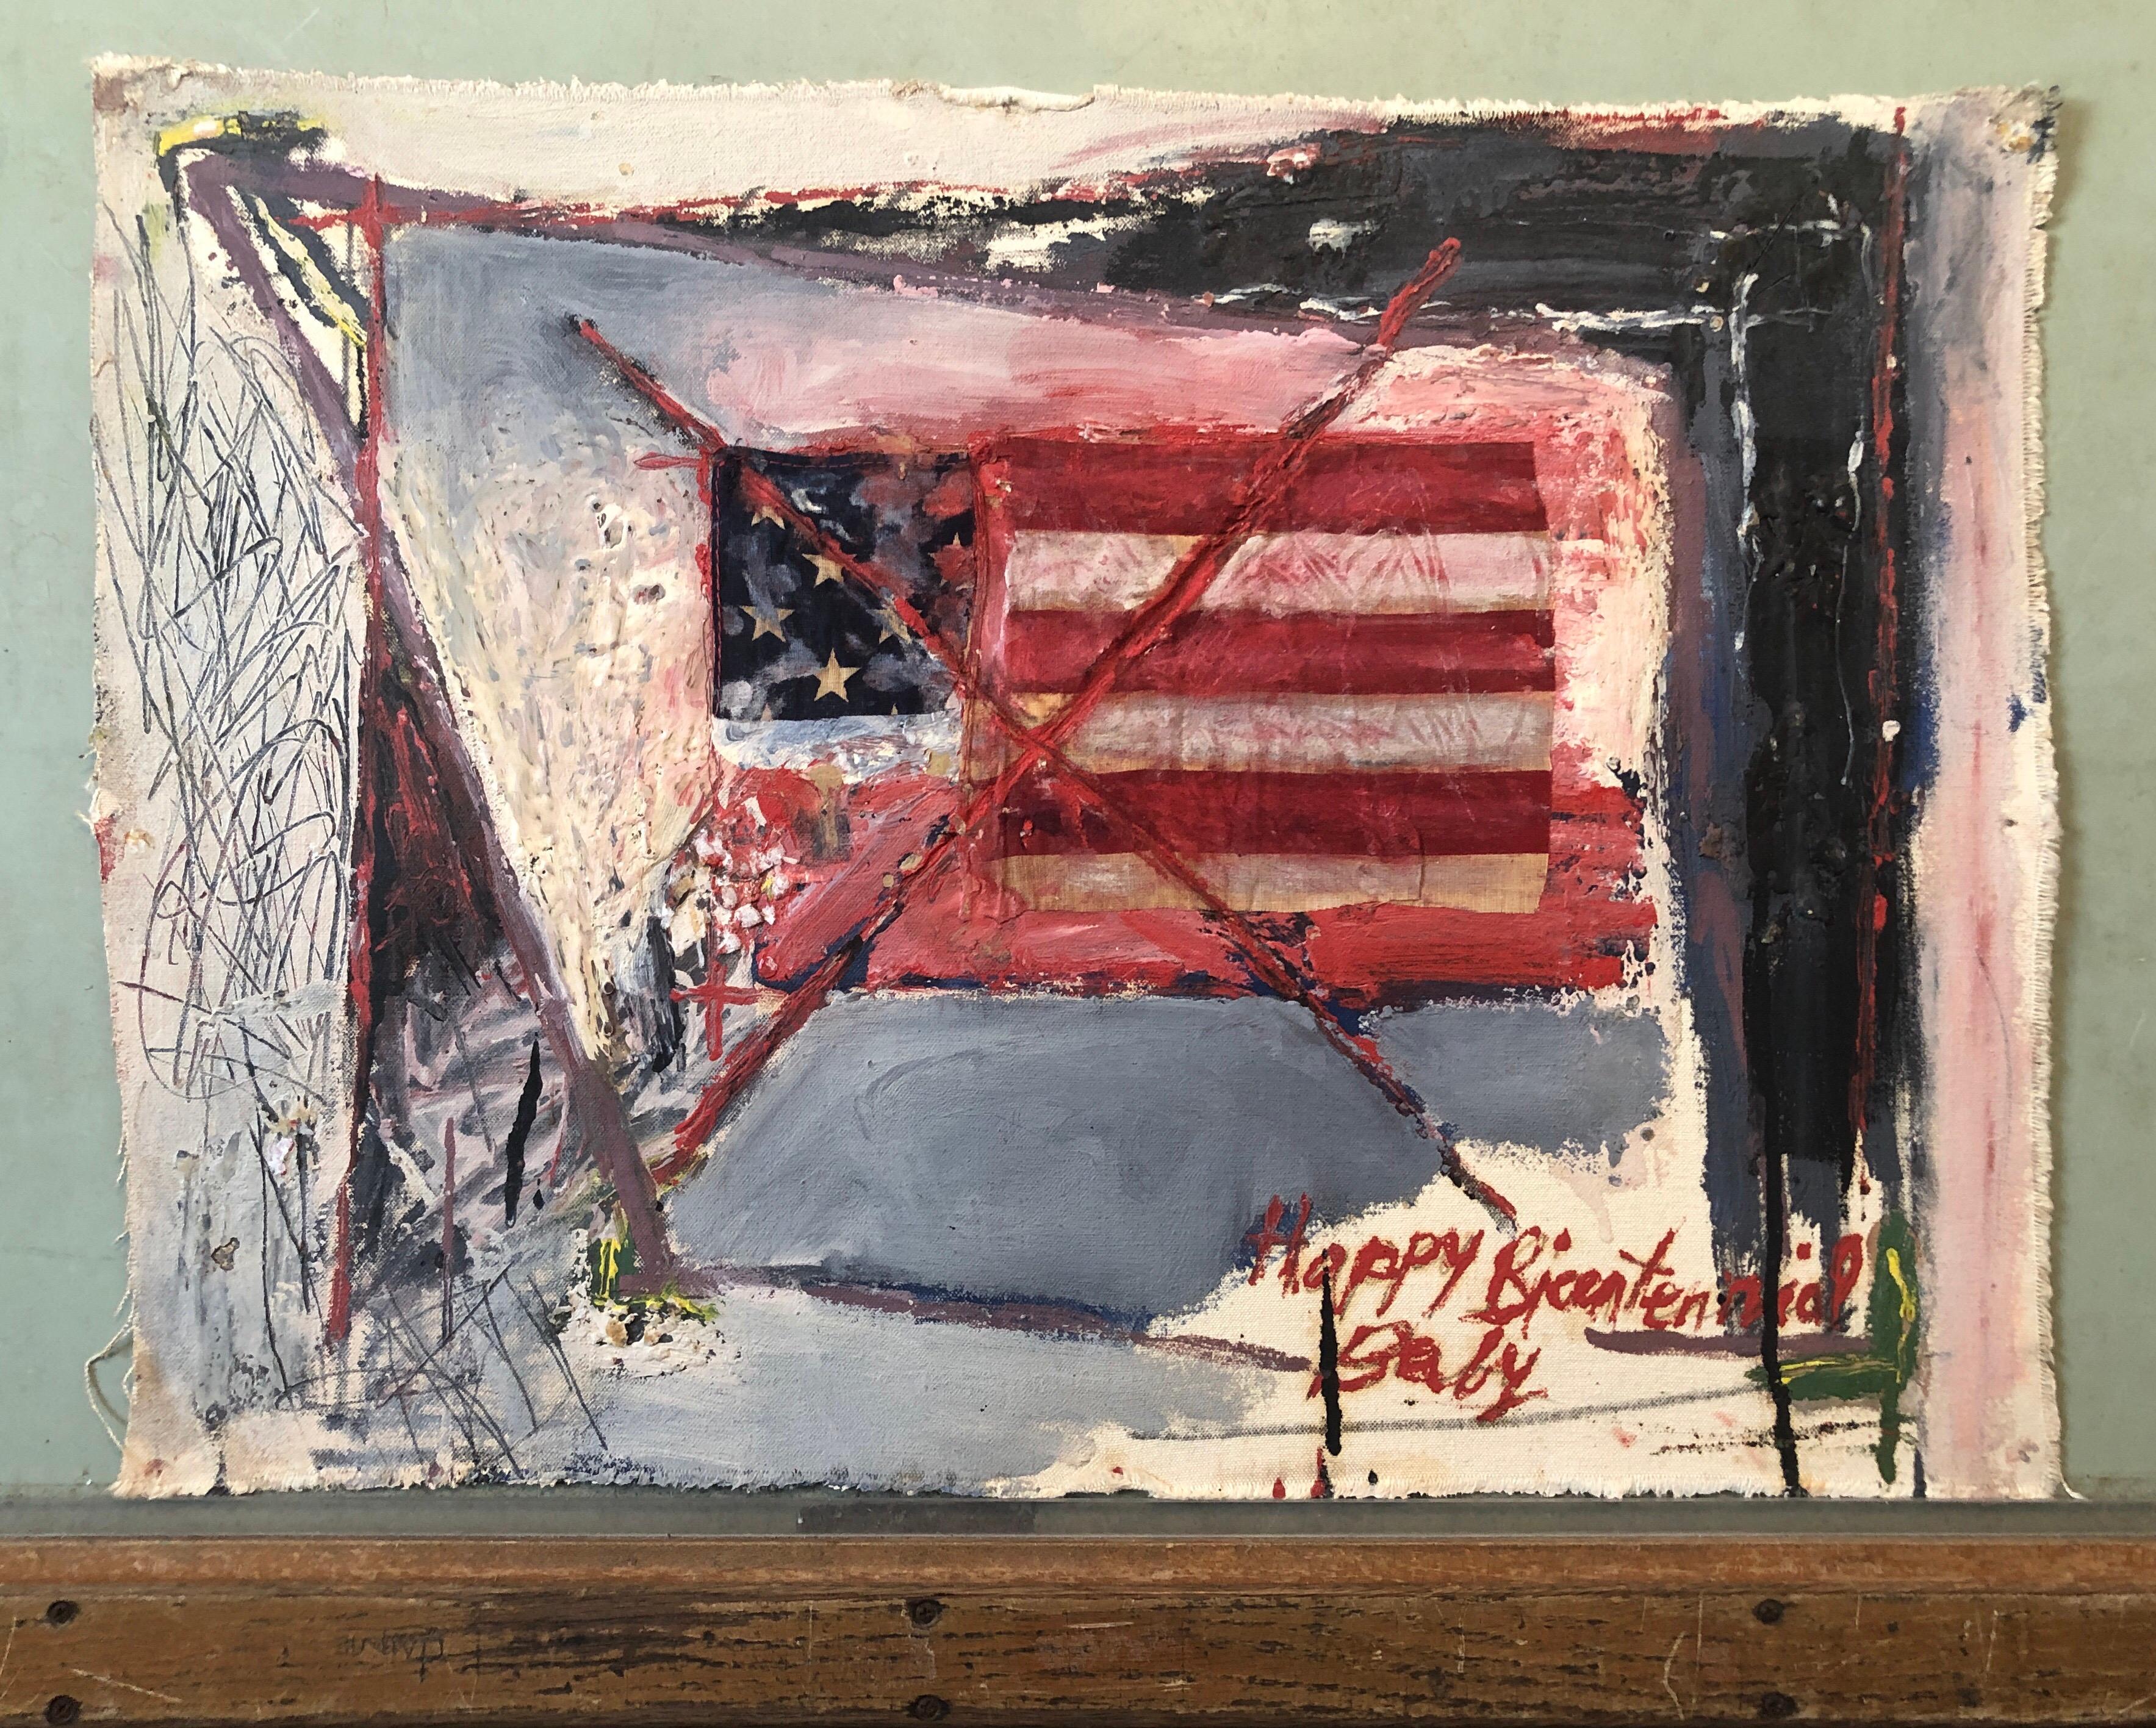 This work is an assemblage collage with oil painting and a textile red white and blue American flag over a splash of denim indigo blue. amongst other elements. Classic Americana. American Abstract Expressionism. This work does not appear to be